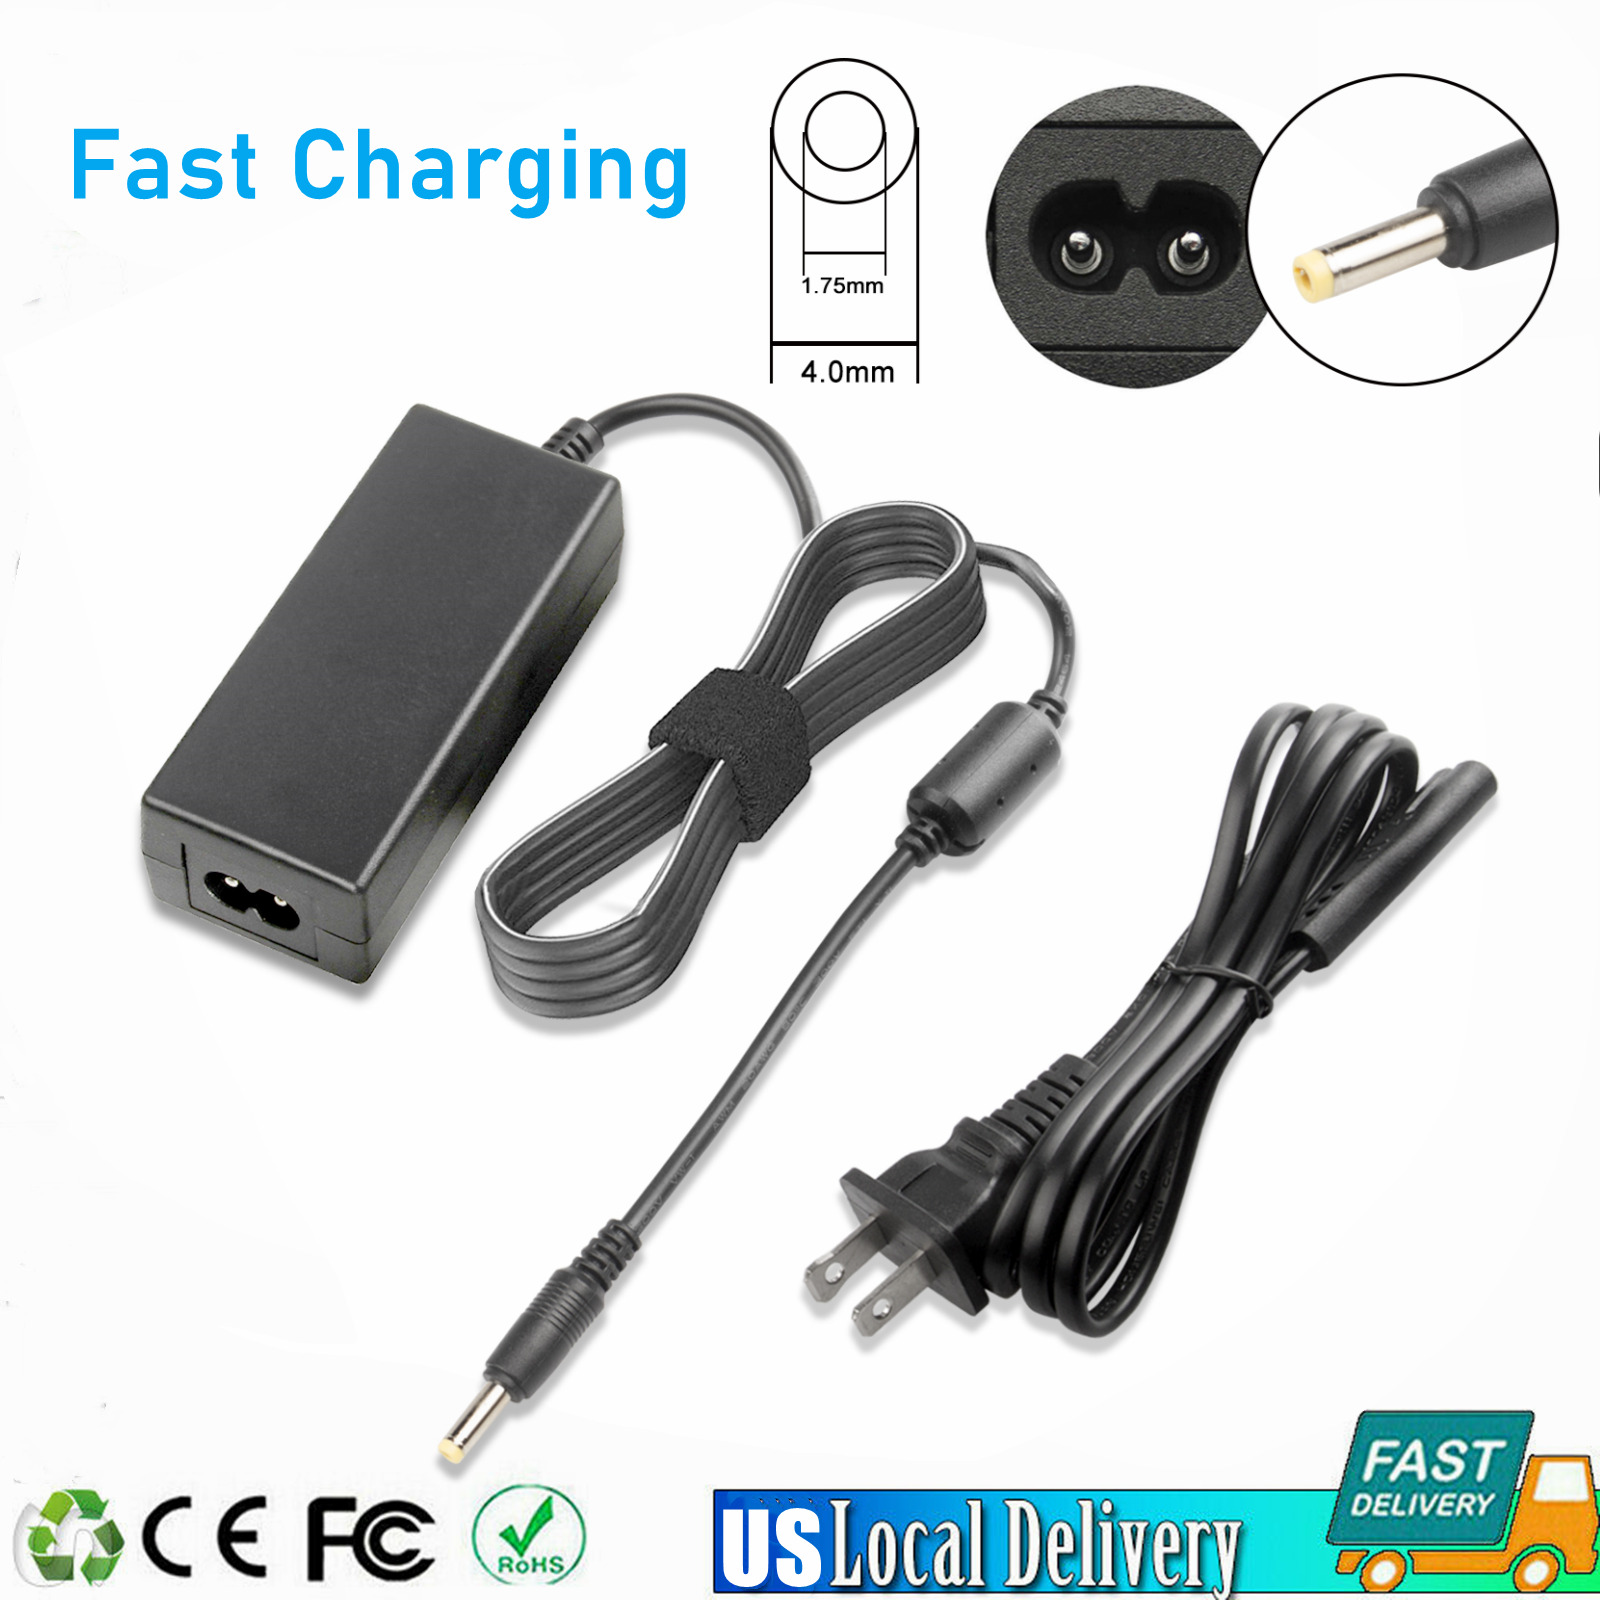 30W AC Adapter For HP COMPAQ Mini 110 210 700 CQ10 Charger Power Supply Cord